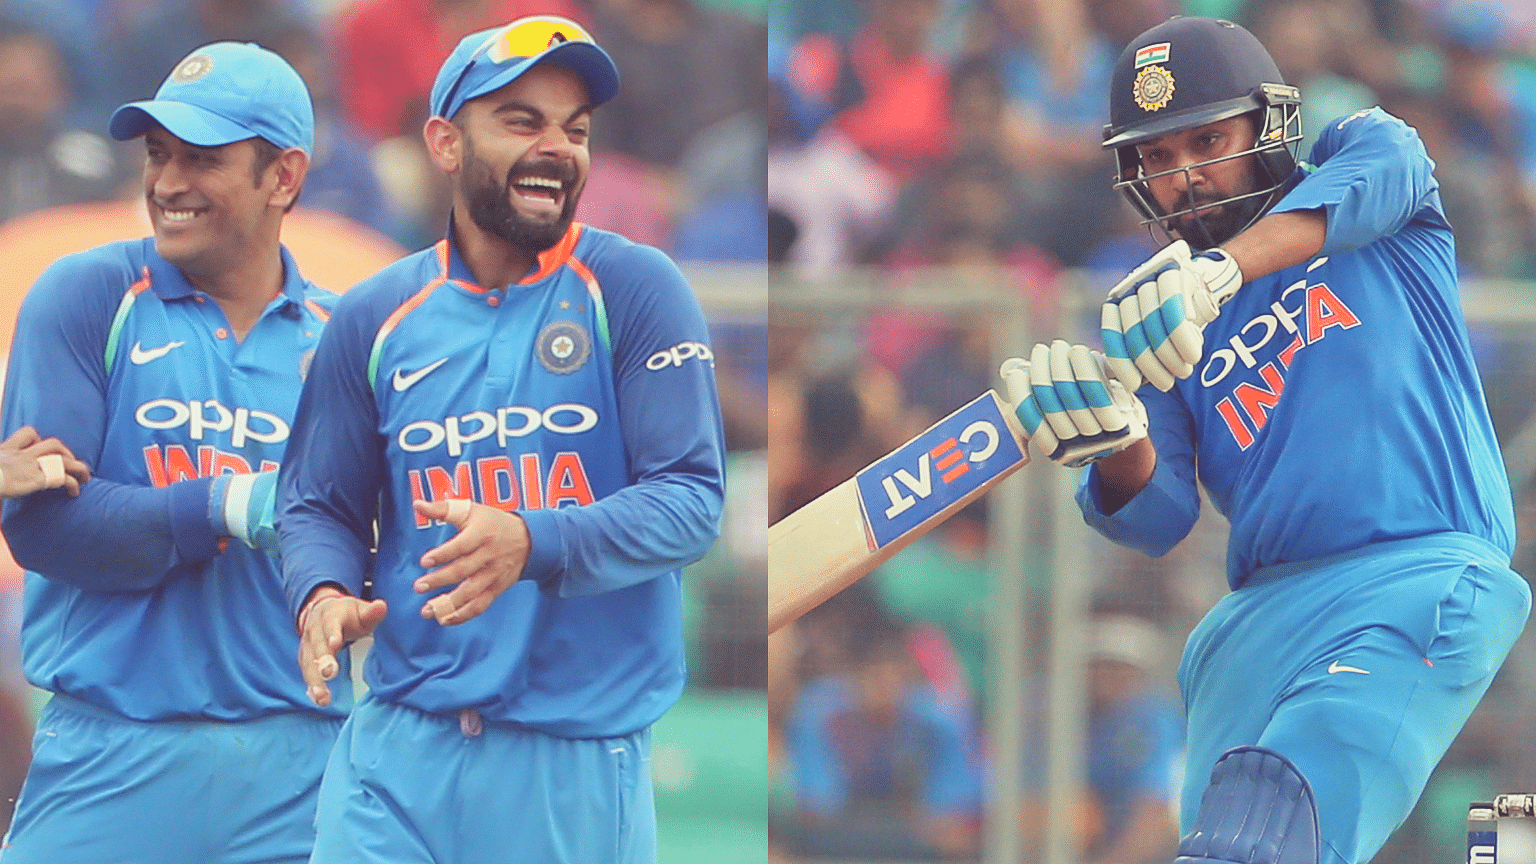 With this win, India recorded their sixth consecutive home-series win.